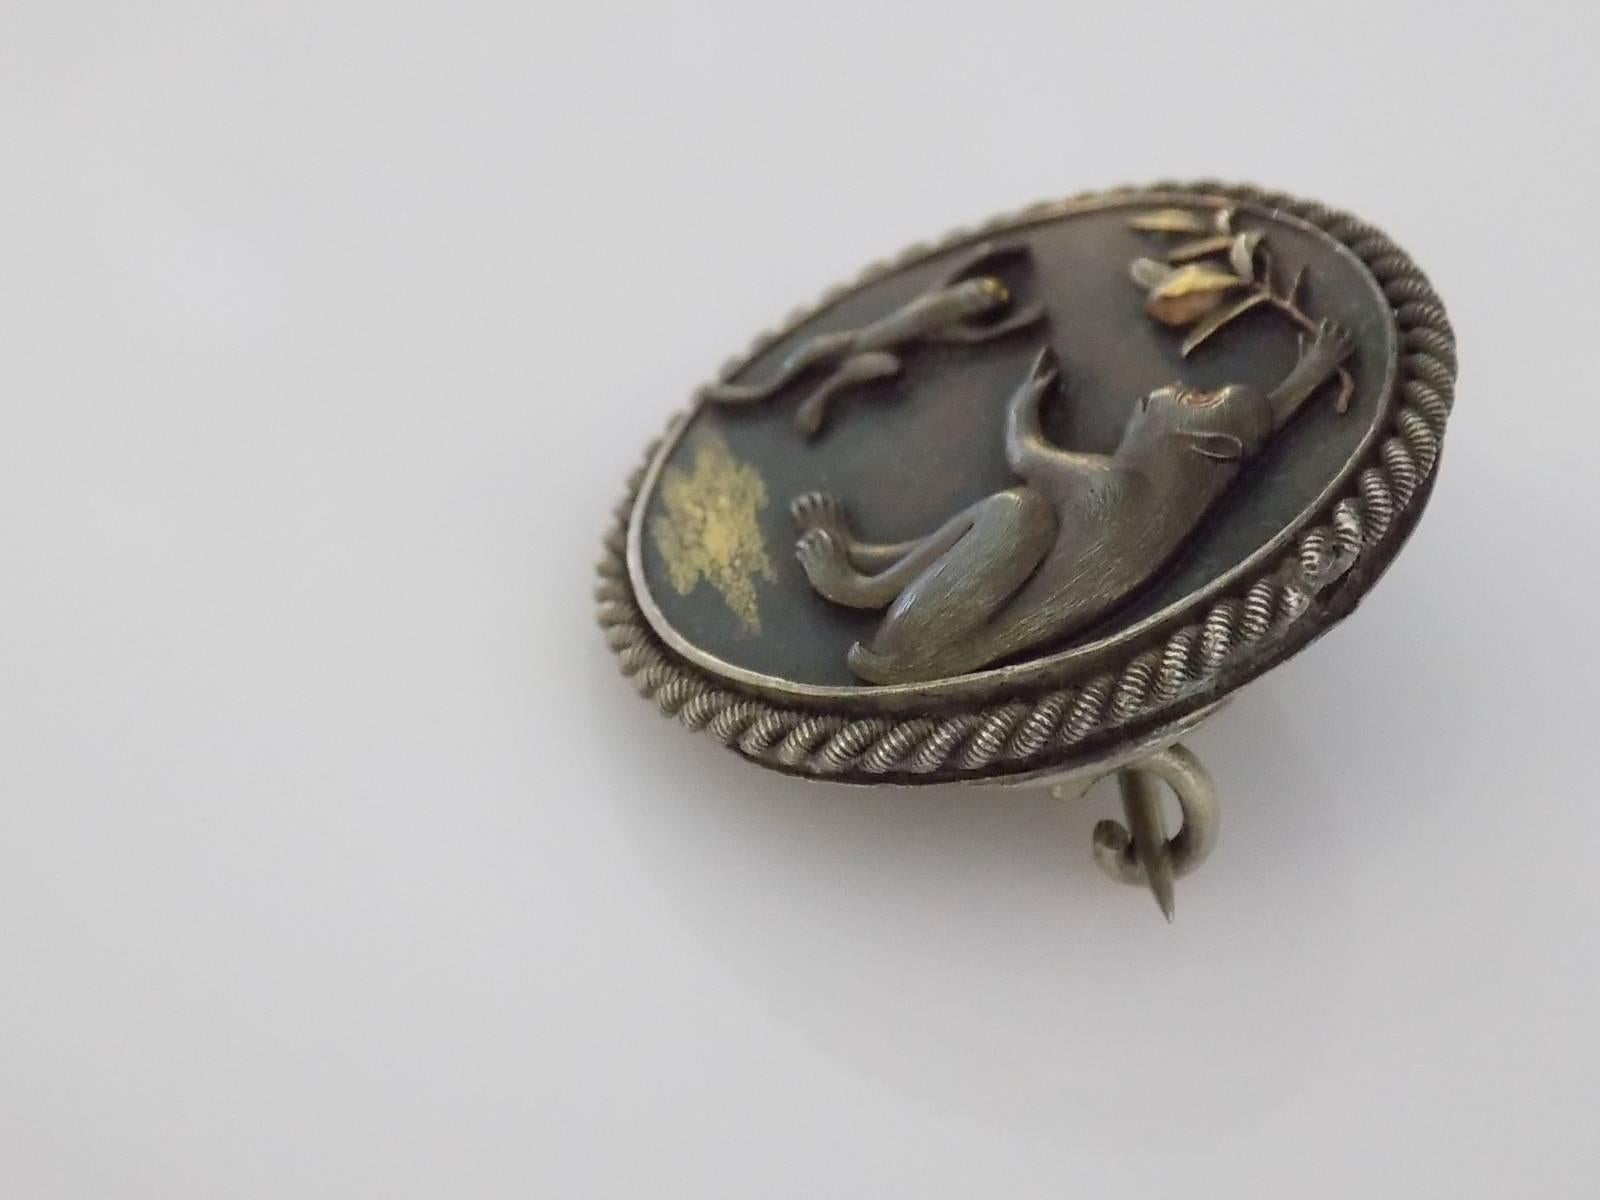 A Stunning Victorian era Japanese Shakudo brooch with an images of monkeys. The mum monkey is teaching her baby to jump to get the fruit on the branch. The brooch made of bronze plaque in silver mount on a white metal backing. Shakudo well know for